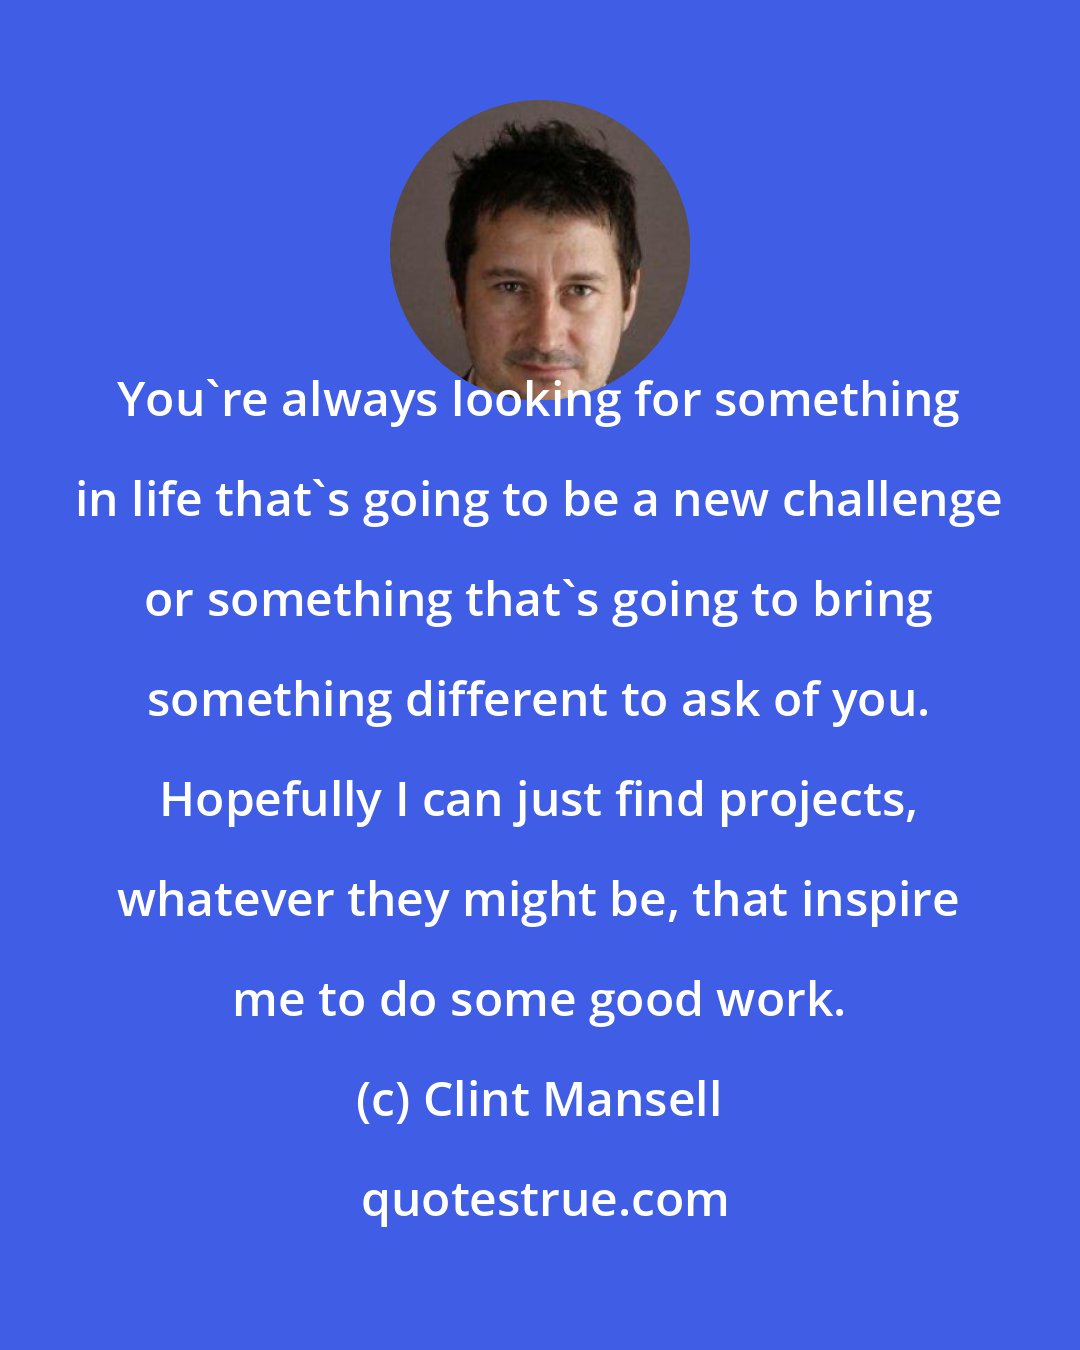 Clint Mansell: You're always looking for something in life that's going to be a new challenge or something that's going to bring something different to ask of you. Hopefully I can just find projects, whatever they might be, that inspire me to do some good work.